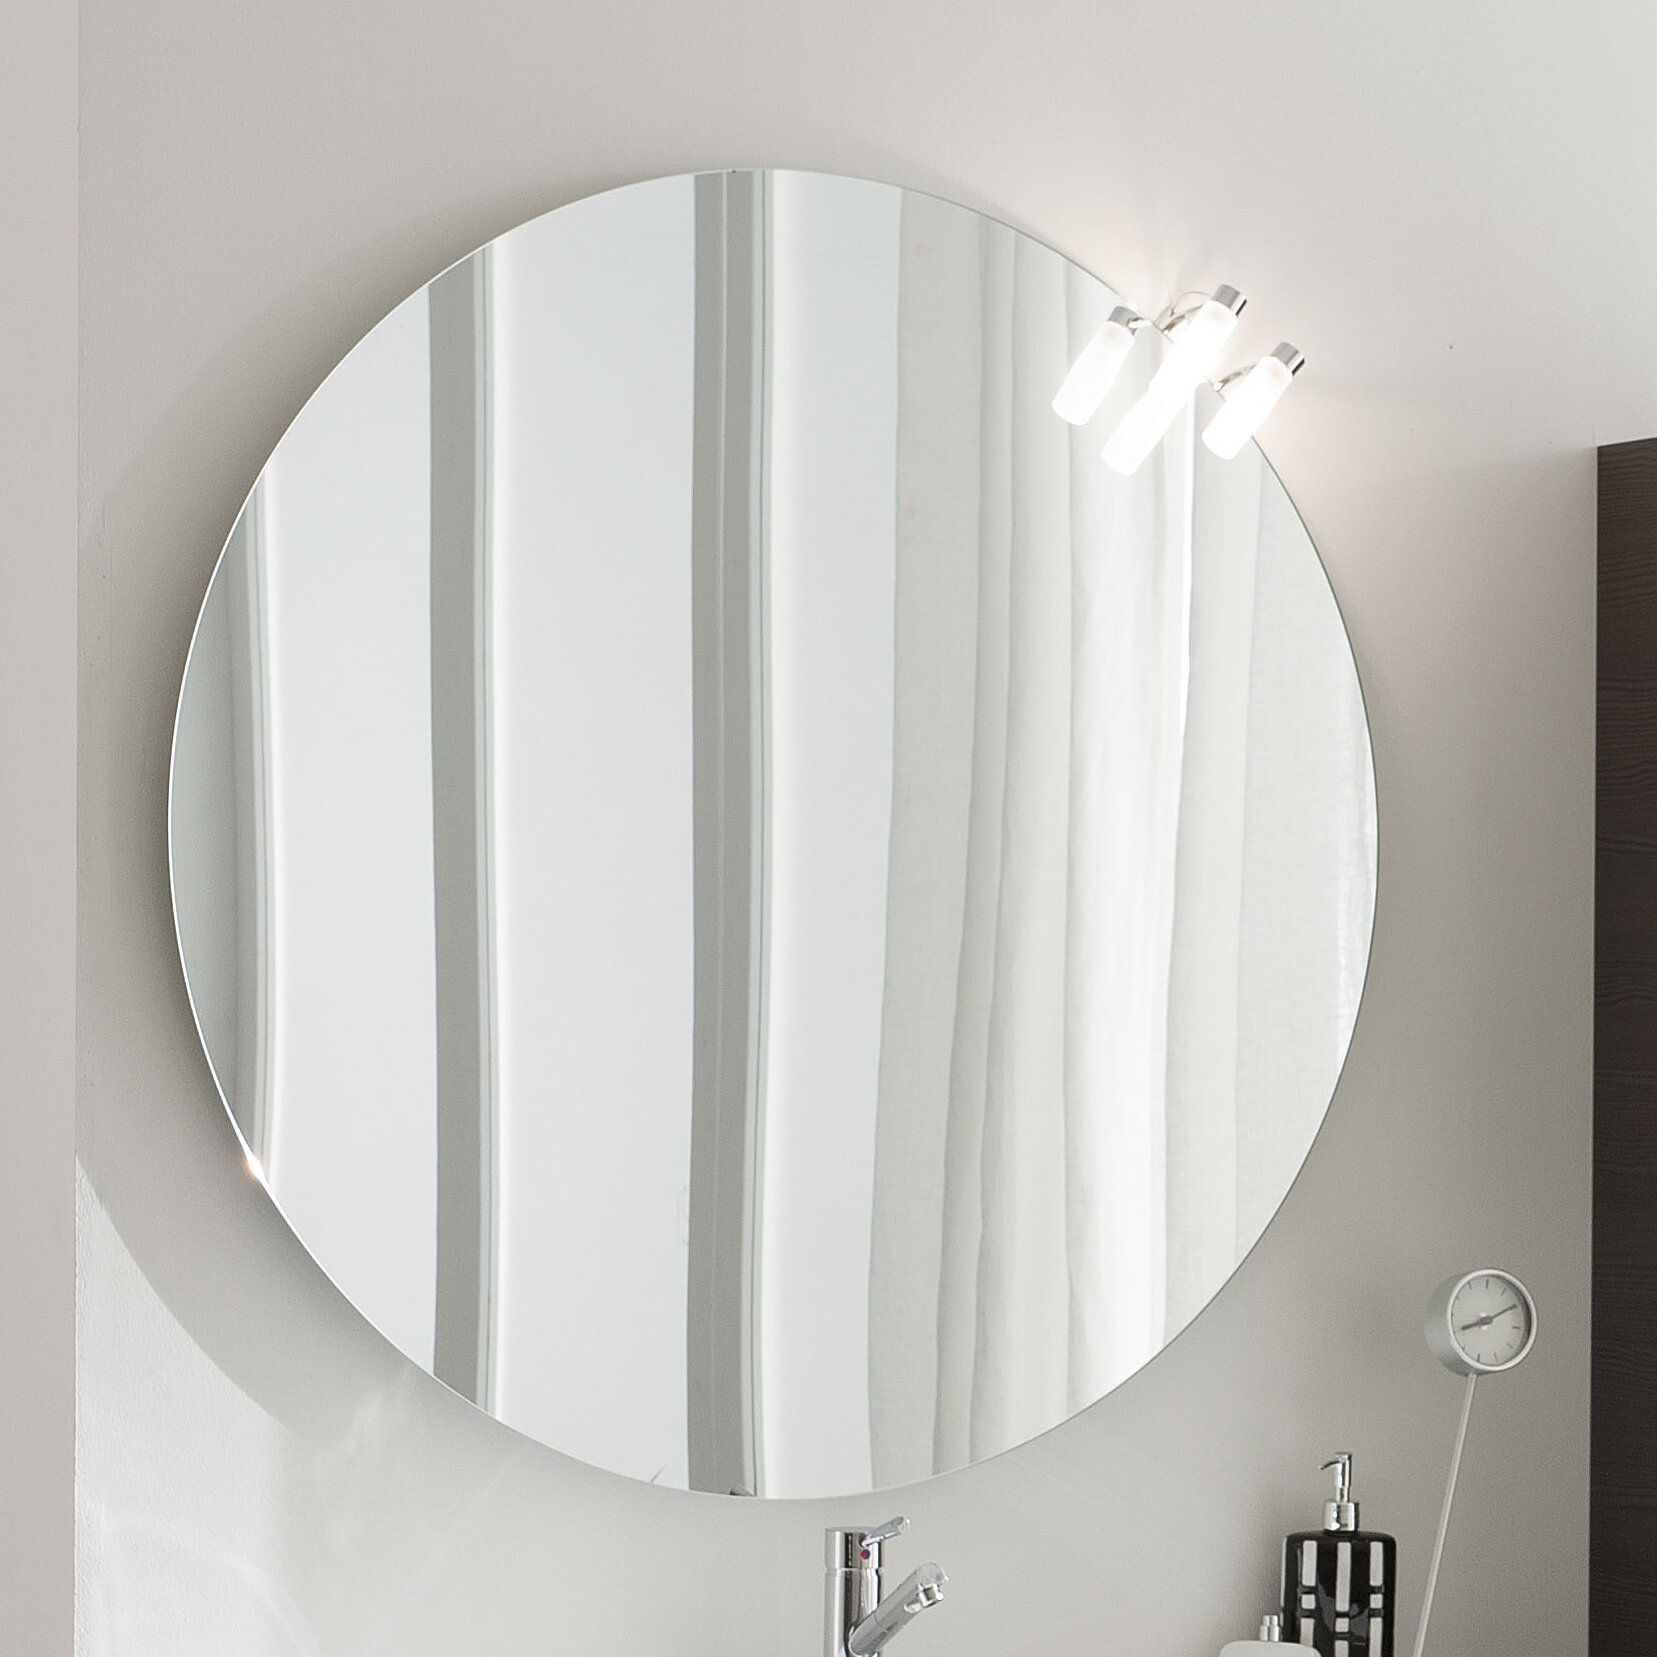 Acquaviva Light 2 Accent Mirror | Ebay Intended For Karn Vertical Round Resin Wall Mirrors (View 8 of 15)